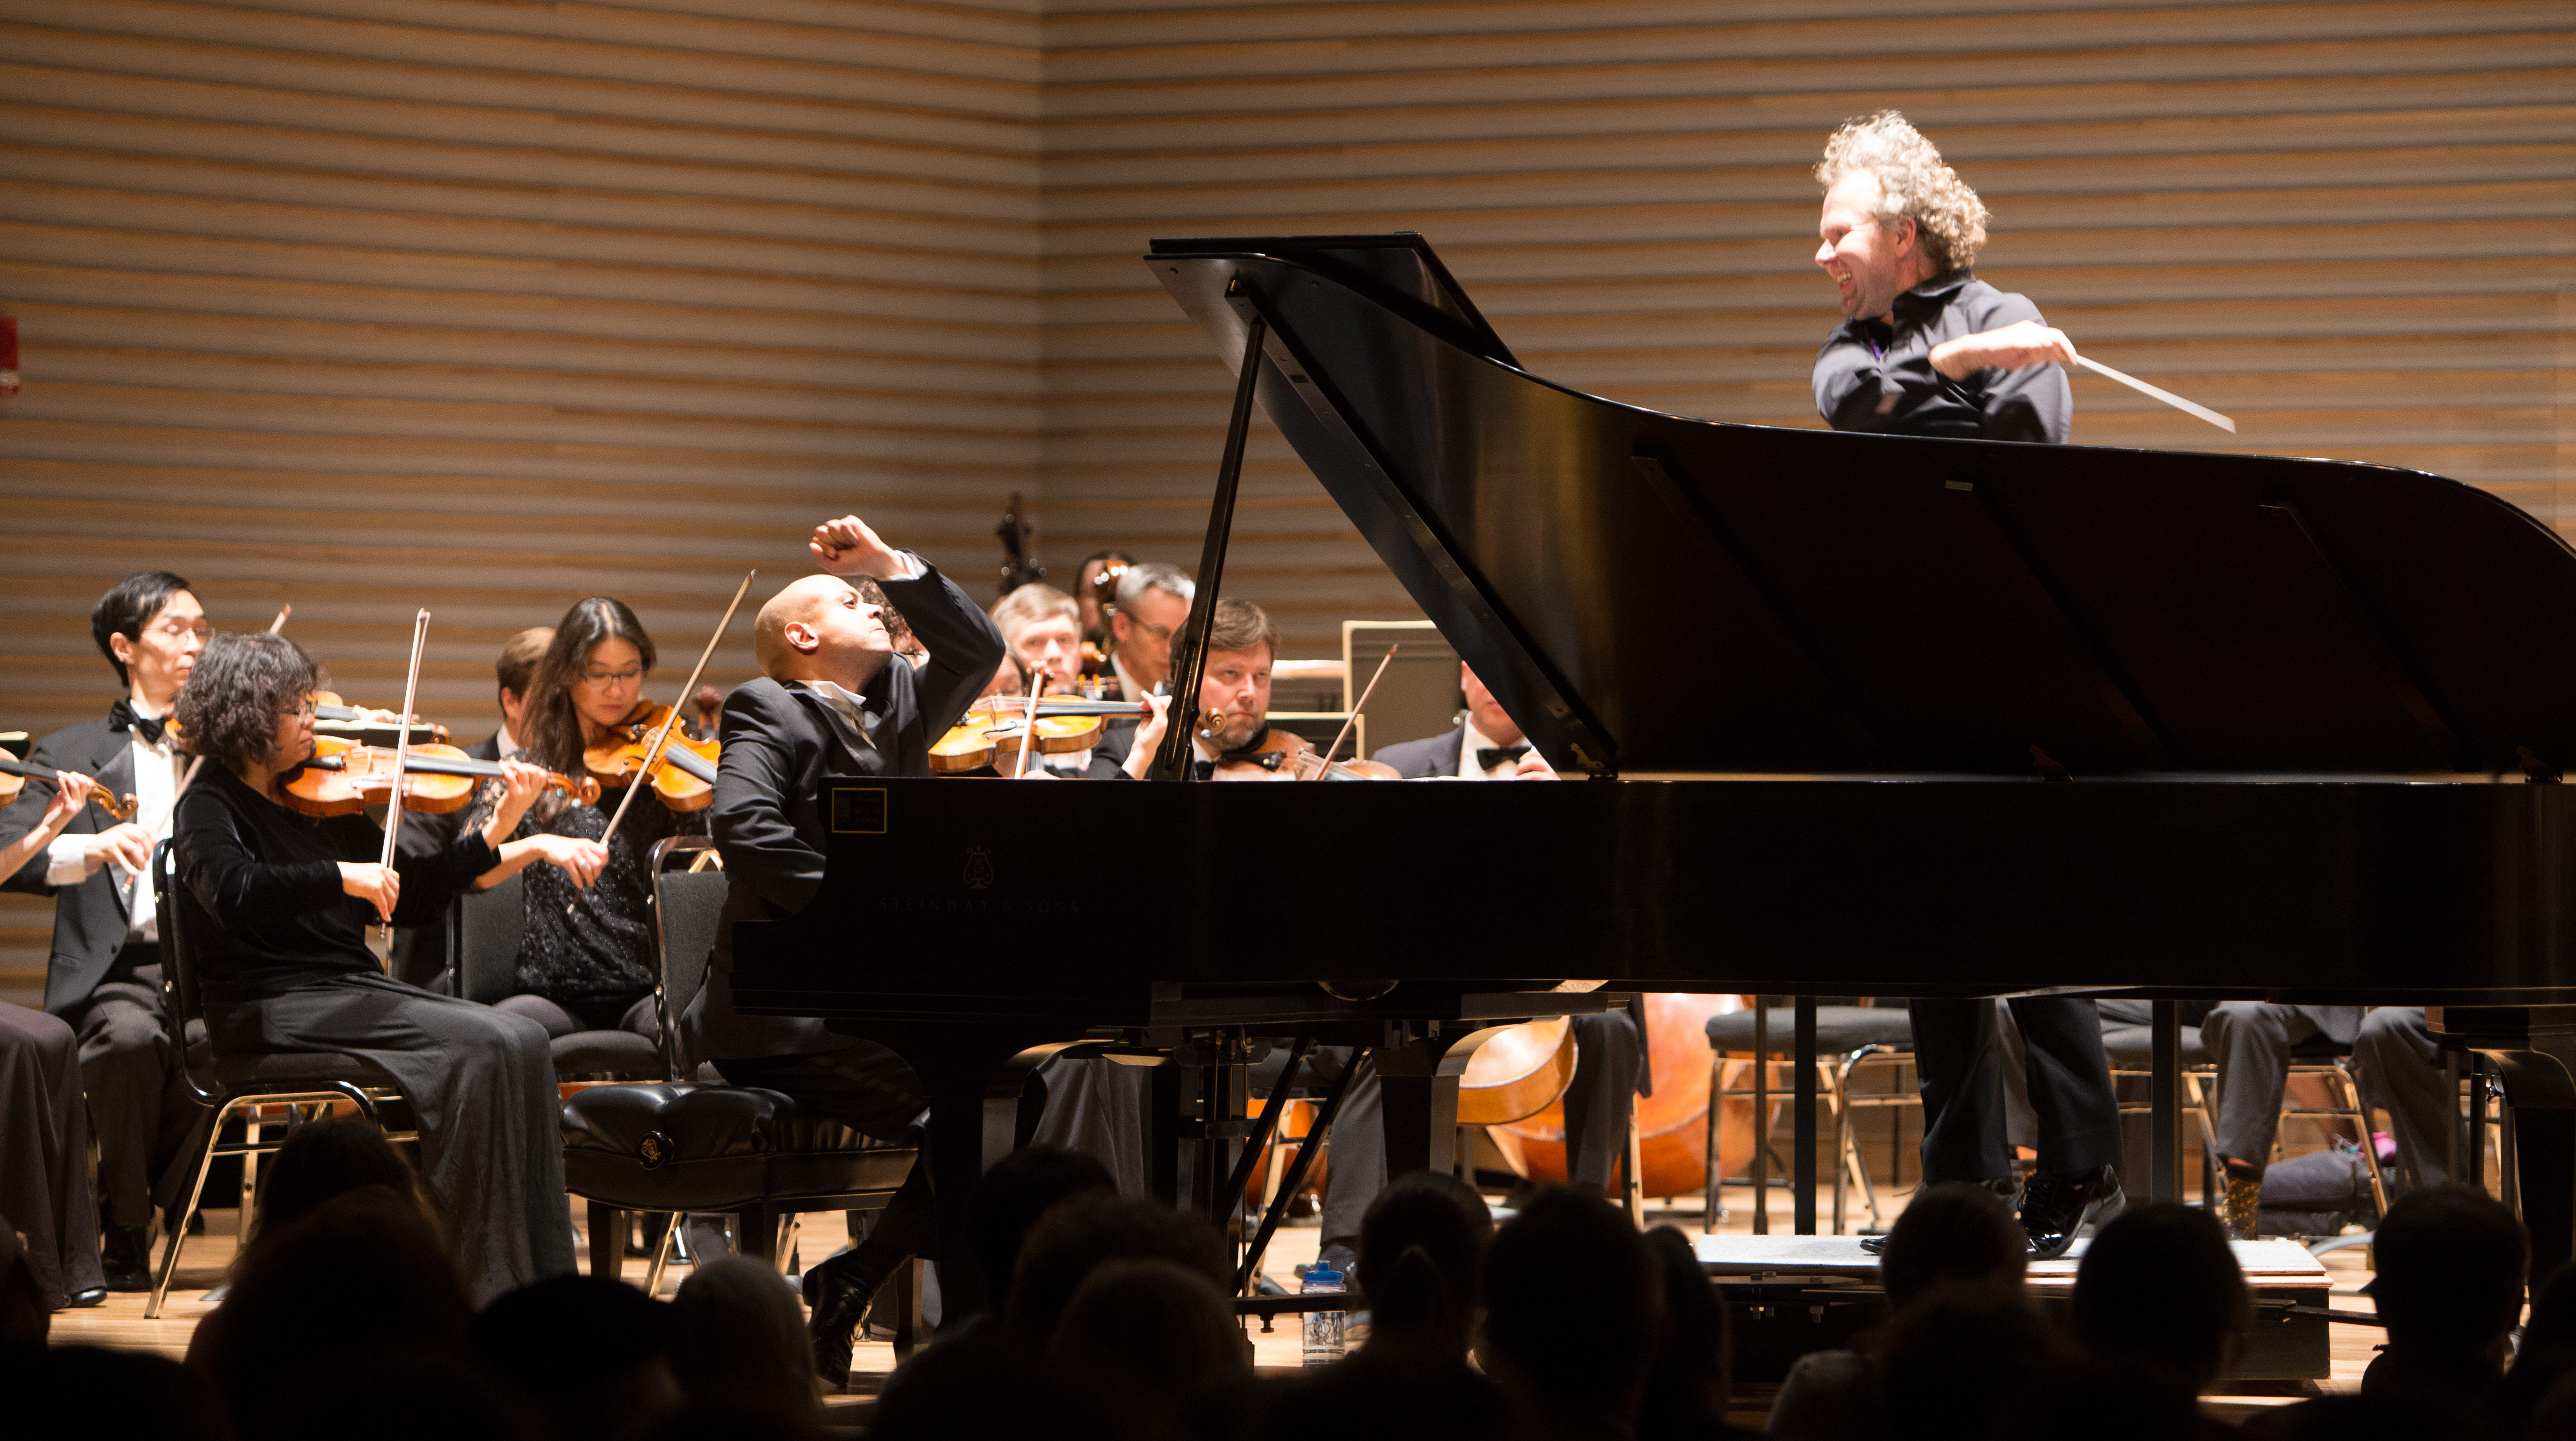 Stewart Goodyear plays piano with orchestra	Stewart Goodyear joue du piano avec l’orchestre